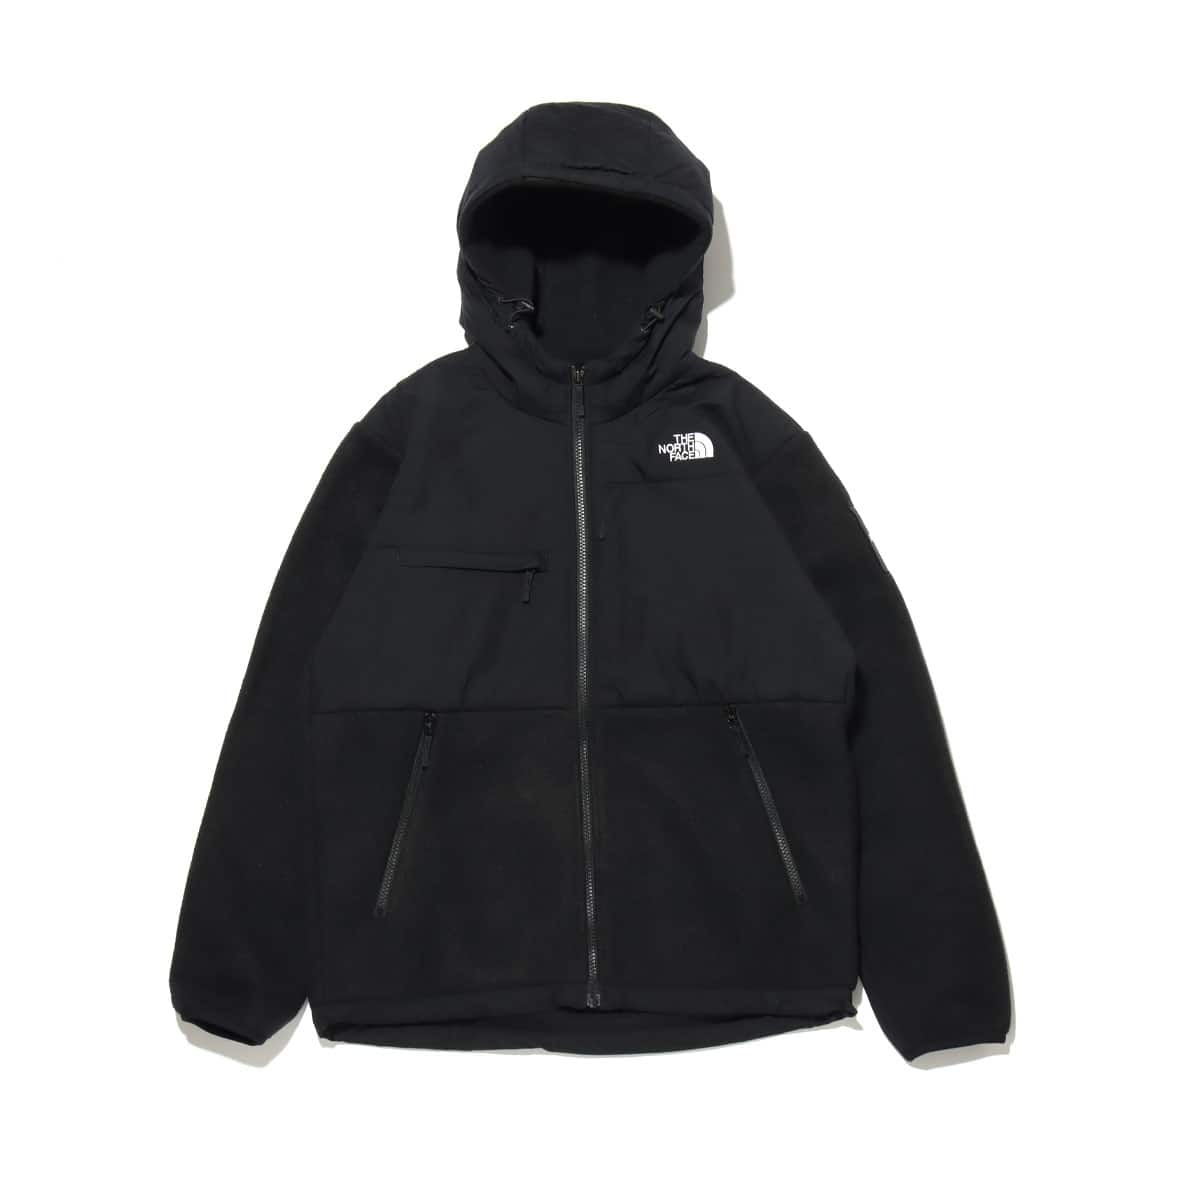 THE NORTH FACE DENALI HOODIE BLACK 22FW-I_photo_large